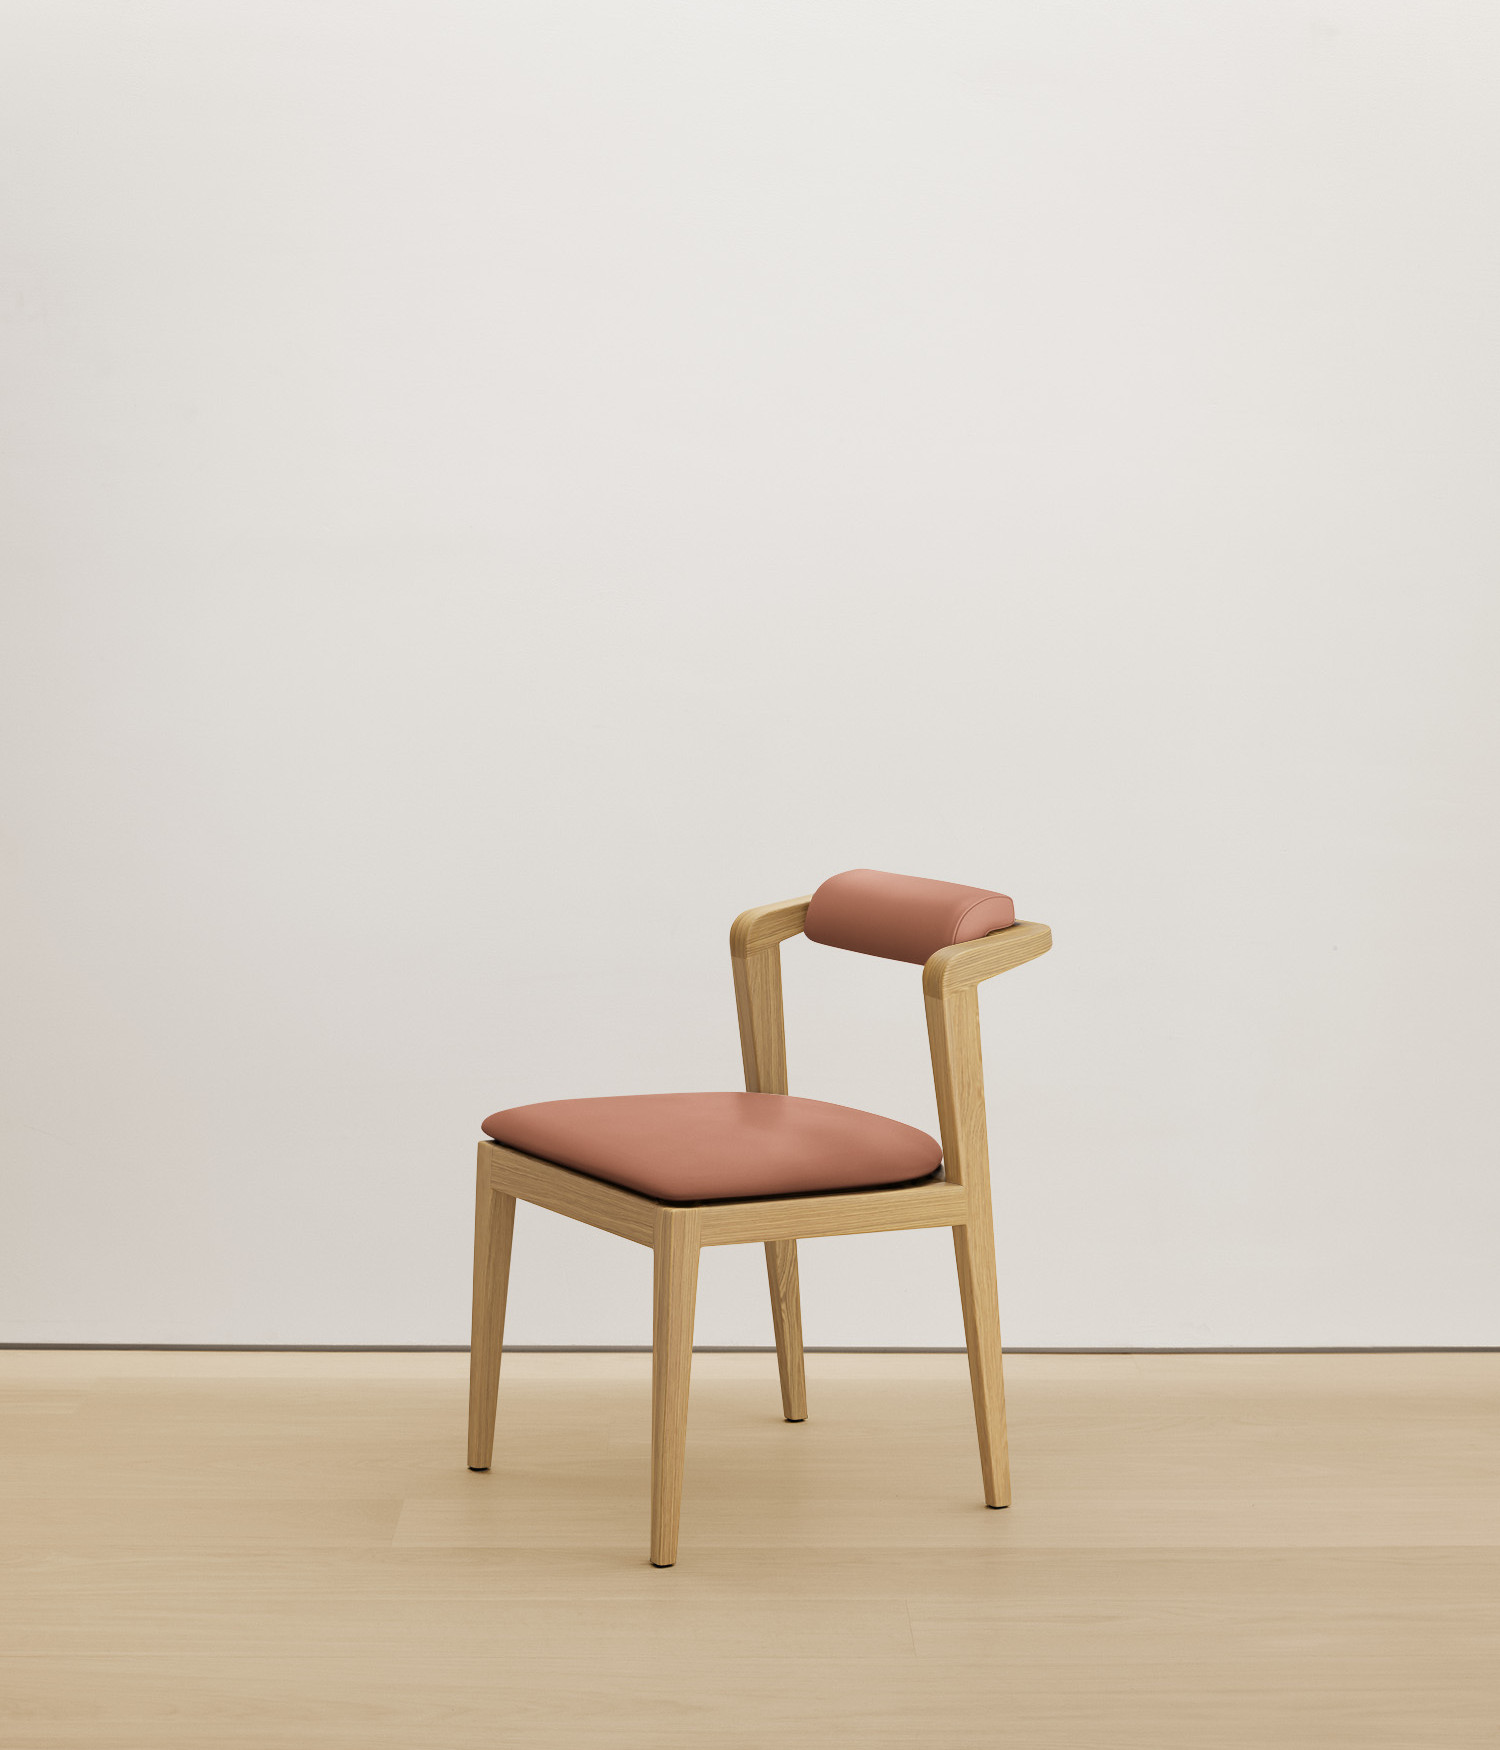  white-oak chair with clay color upholstered seat